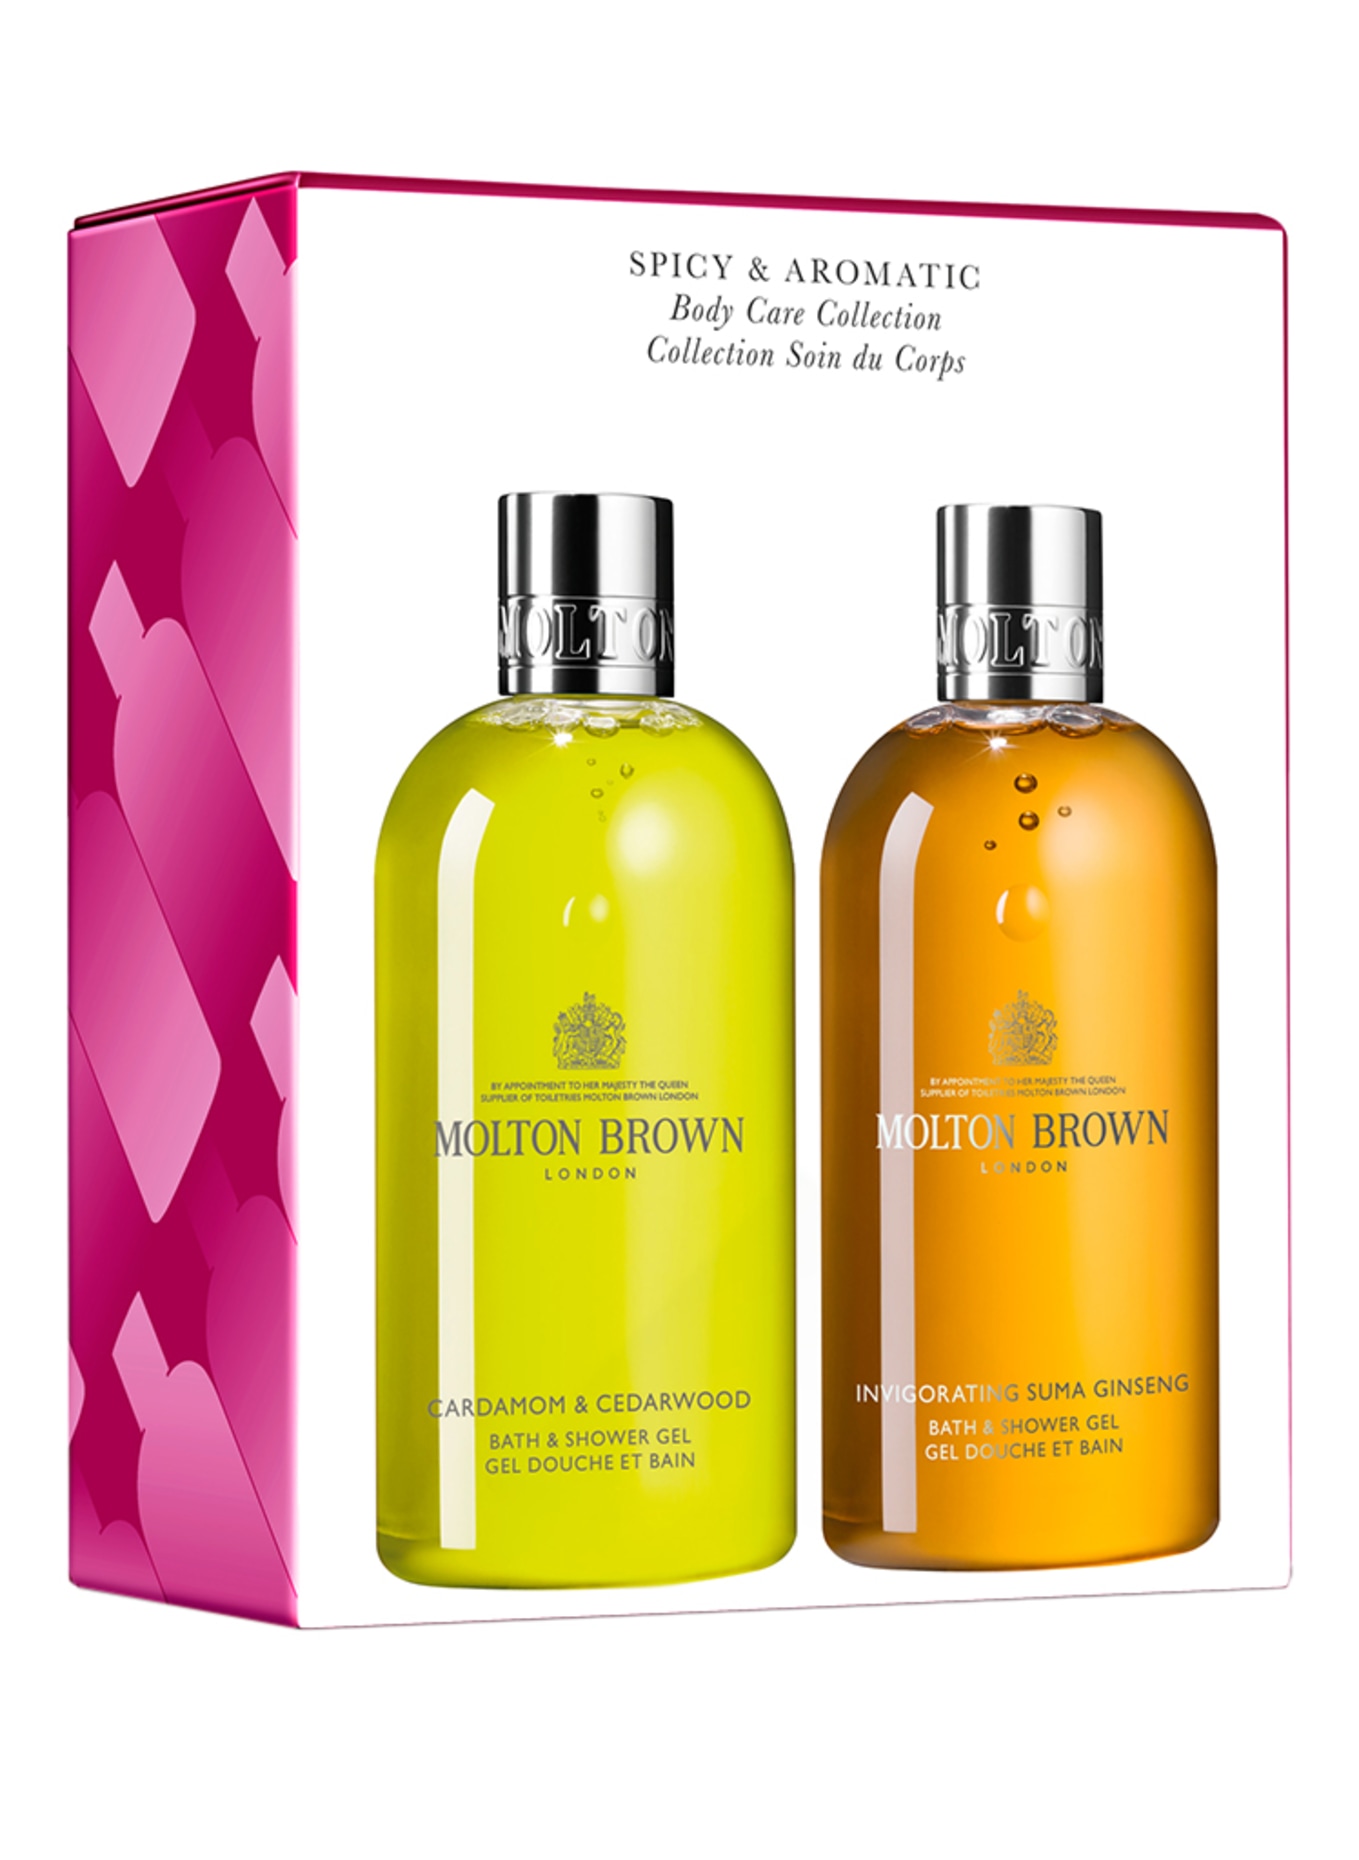 MOLTON BROWN SPICY & AROMATIC Body Care COLLECTION (Obrázek 1)